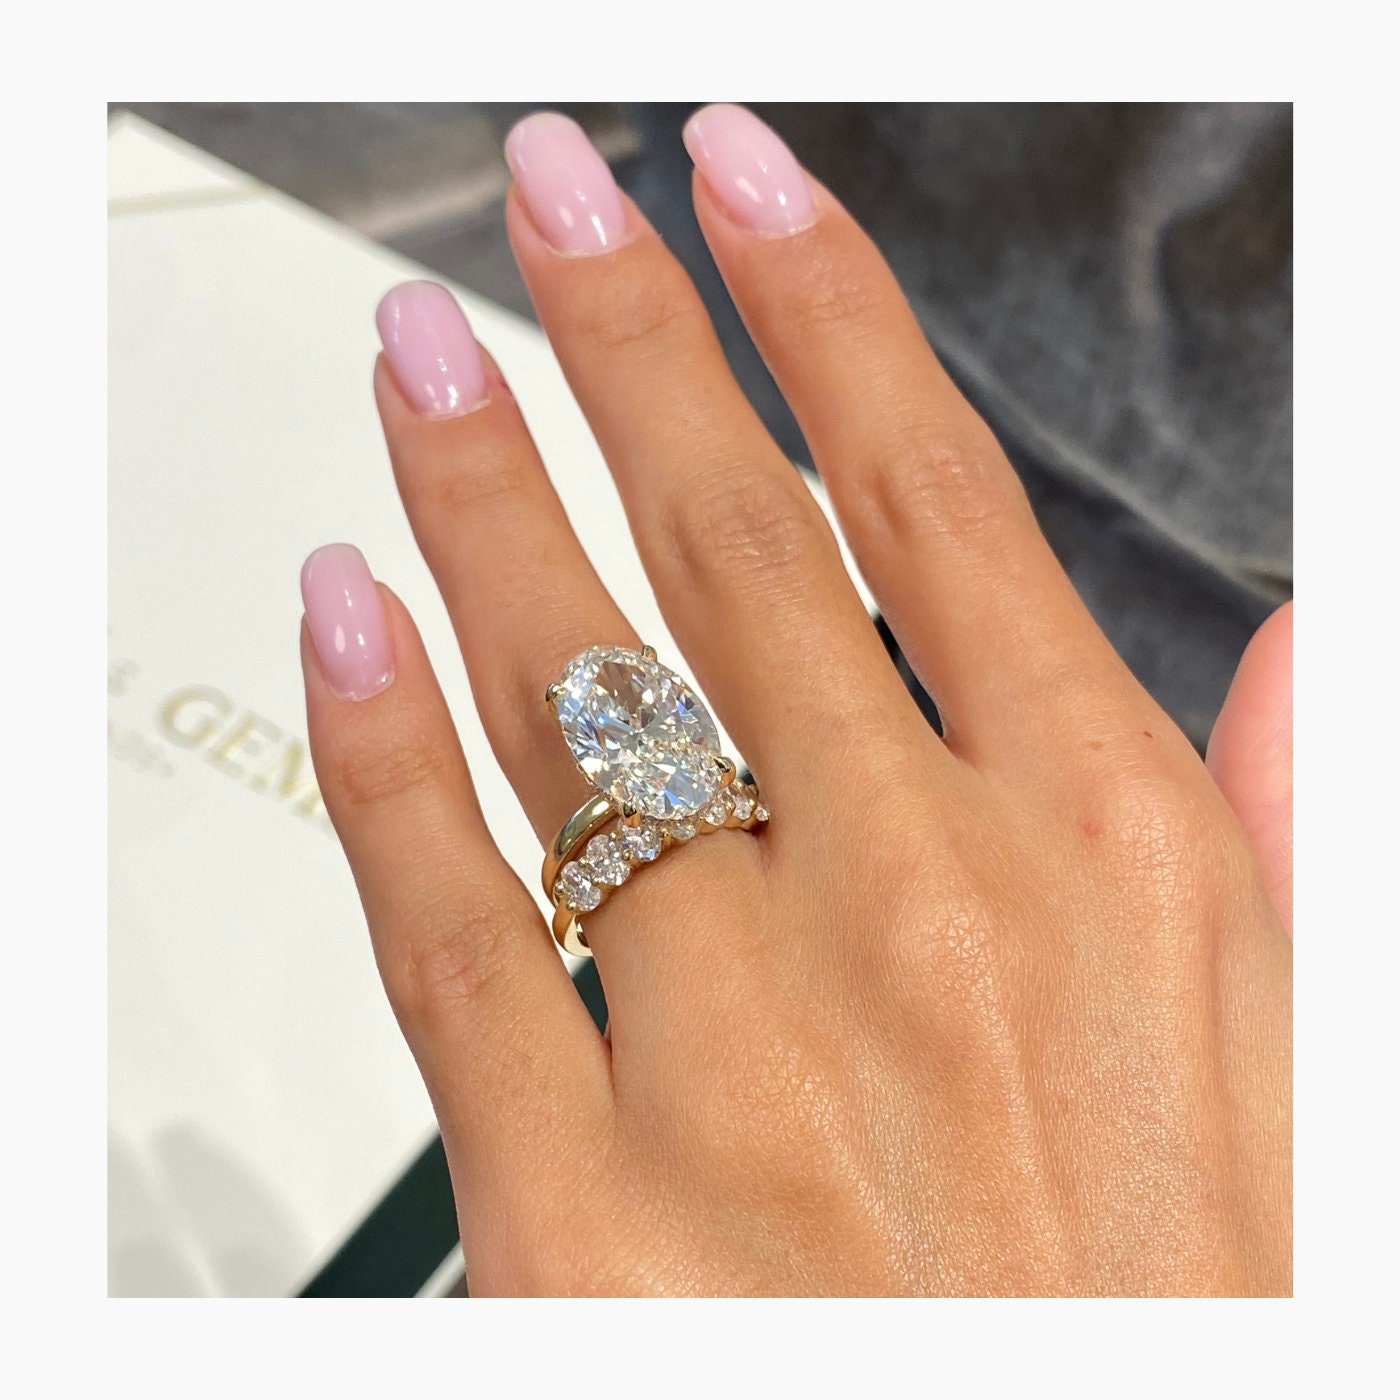 Hailey Bieber's Engagement Ring - The Fine Details and Ho...